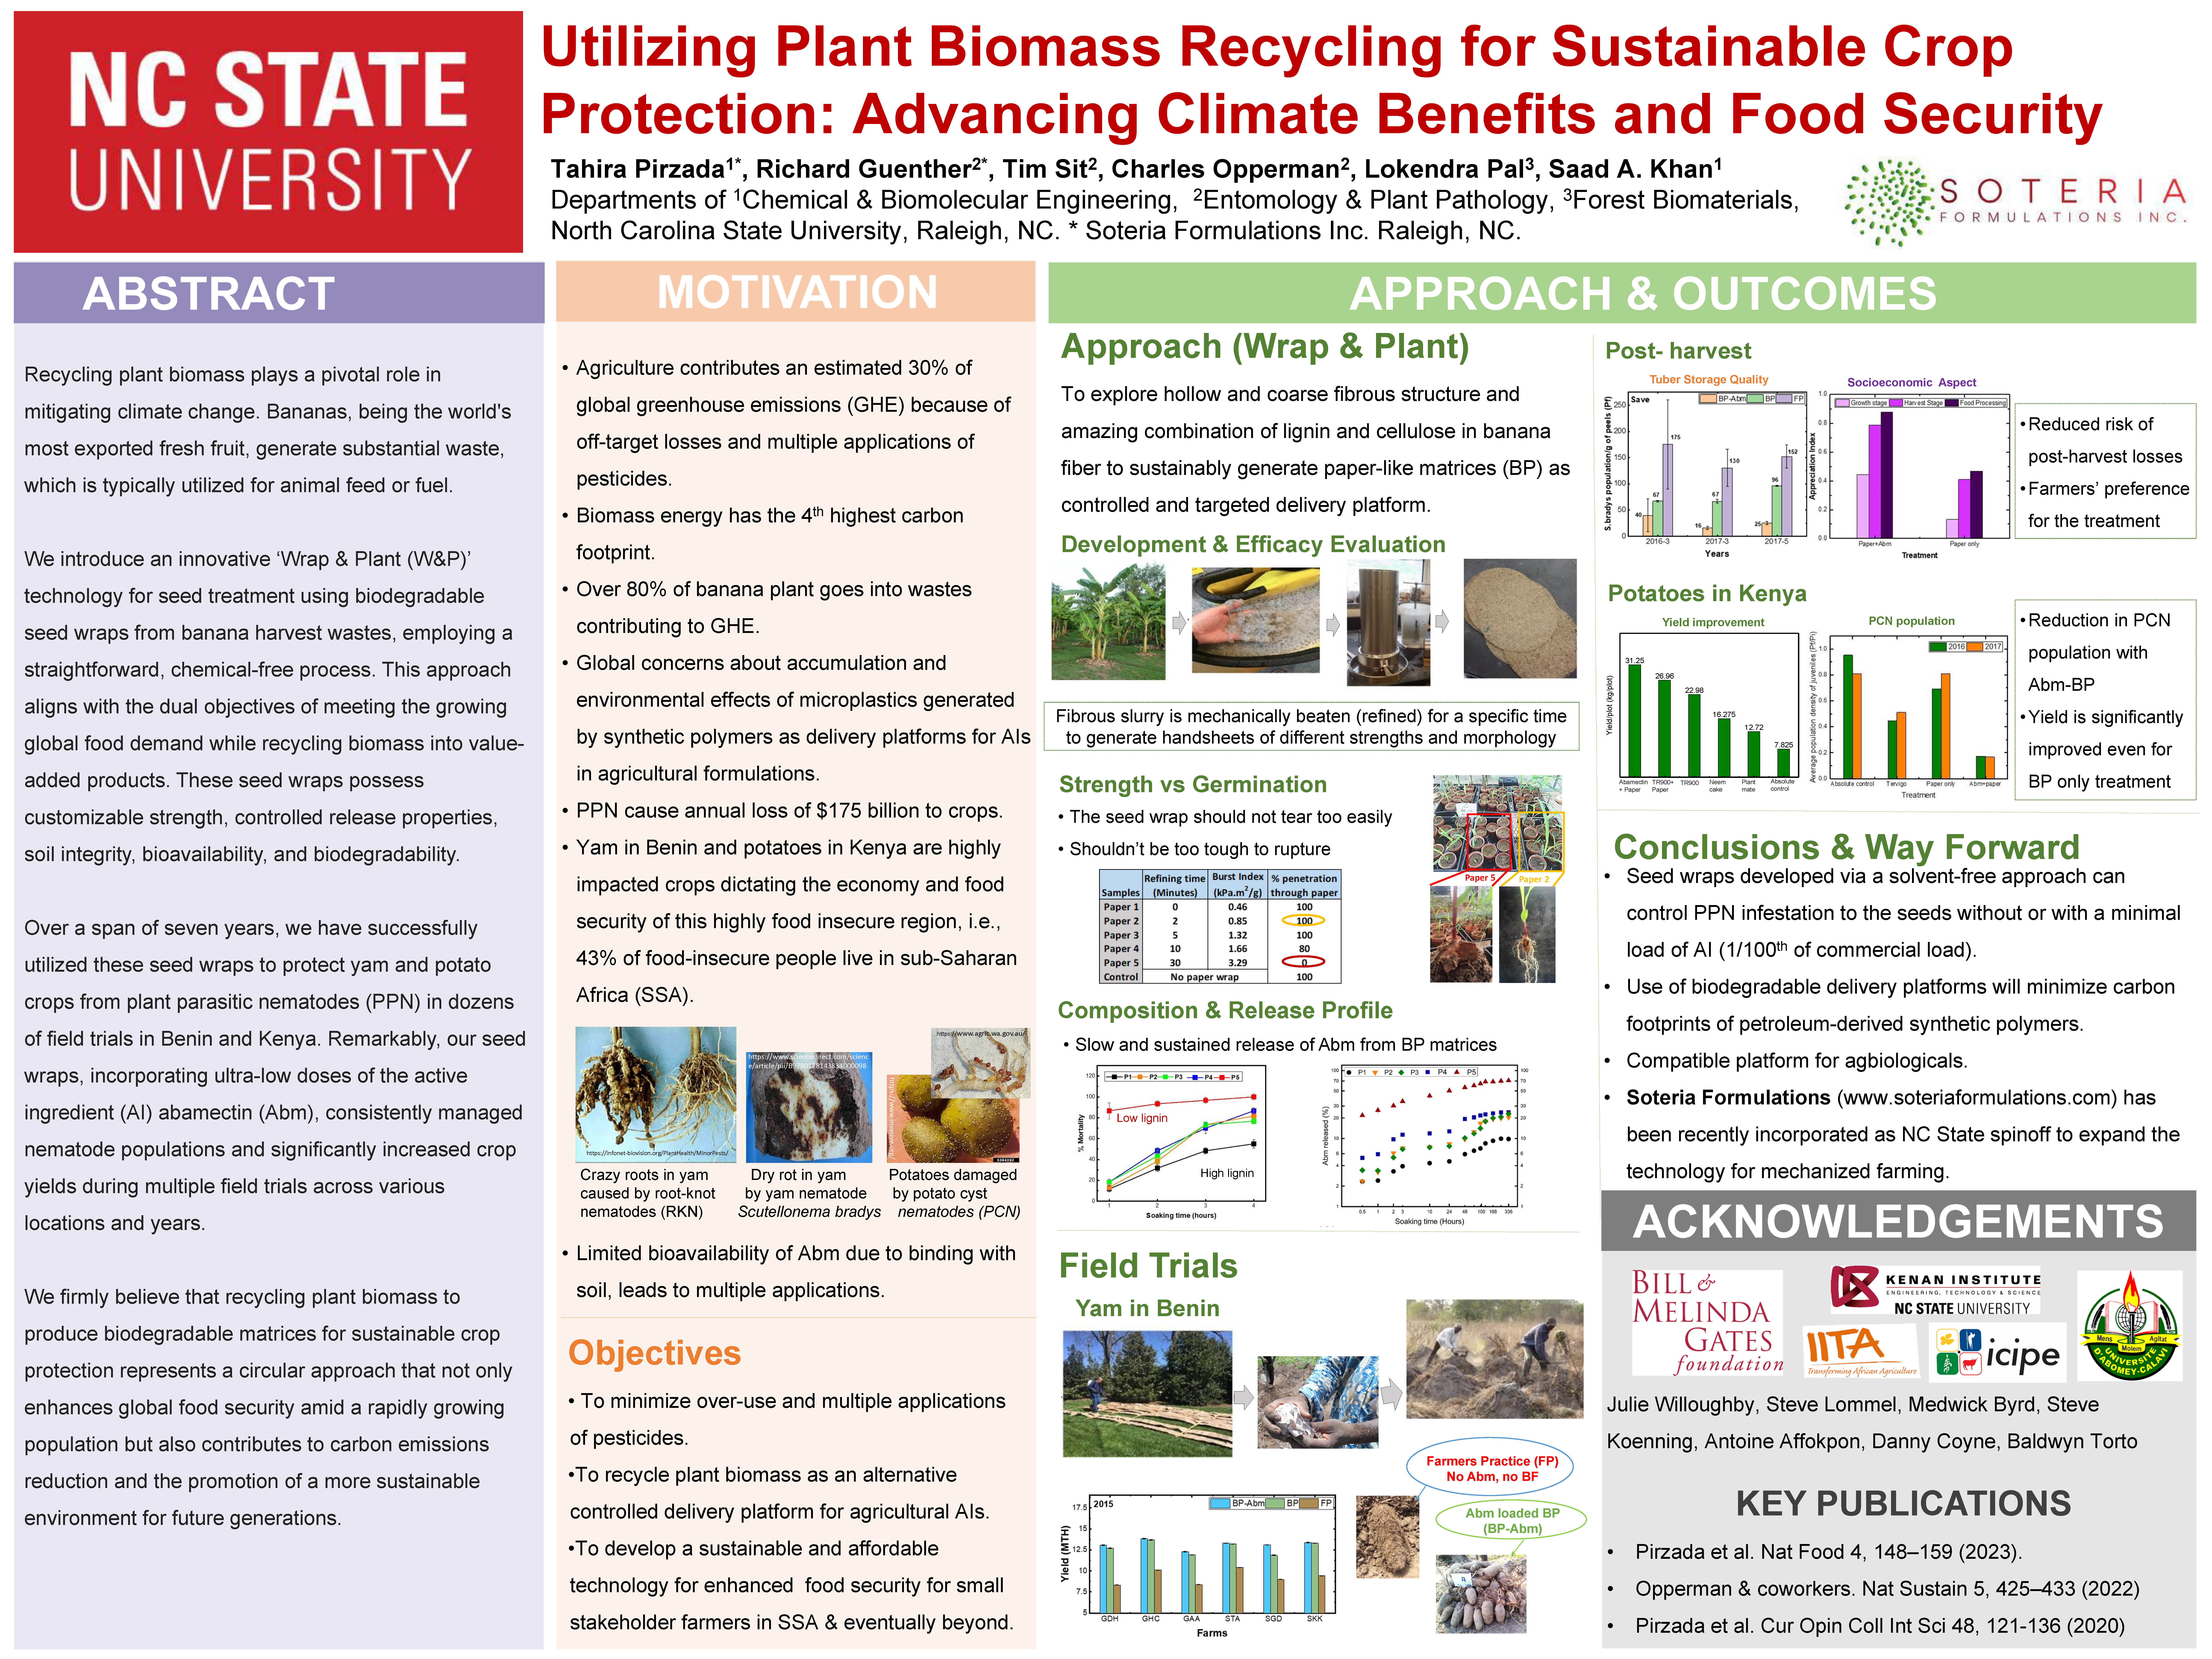 image of Tahira Pirzada's poster, "Utilizing Plant Biomass Recycling for Sustainable Crop Protection: Advancing Climate Benefits and Food Security"